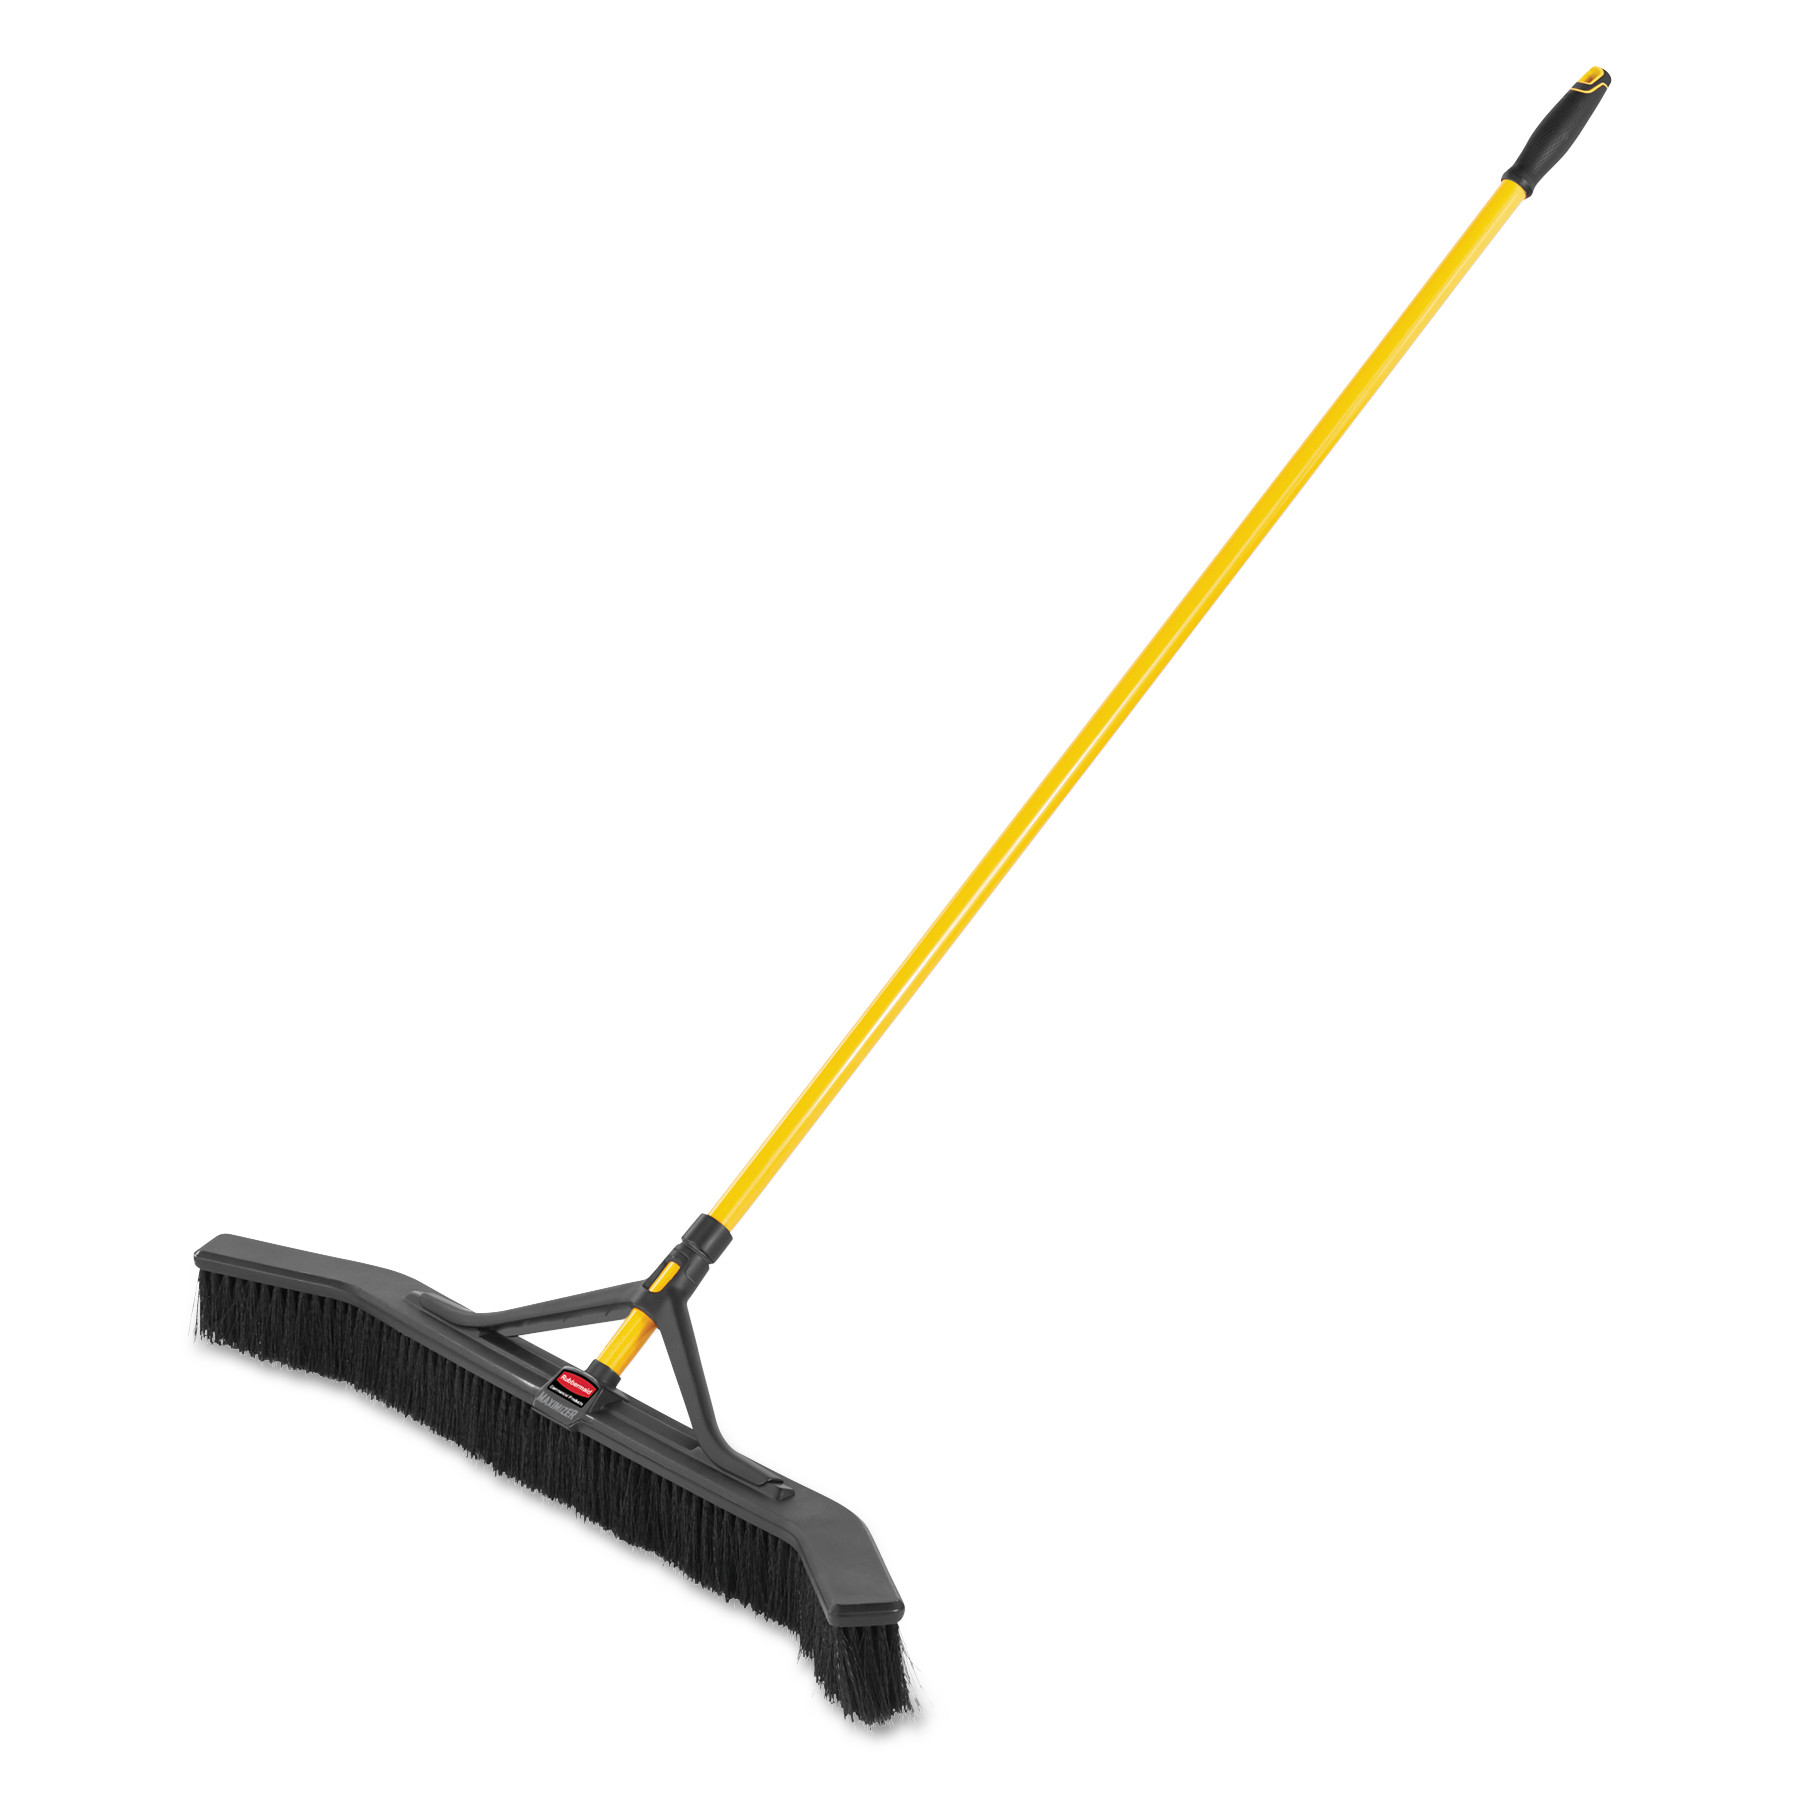  Rubbermaid Commercial 2018728 Maximizer Push-to-Center Broom, 36, Polypropylene Bristles, Yellow/Black (RCP2018728) 